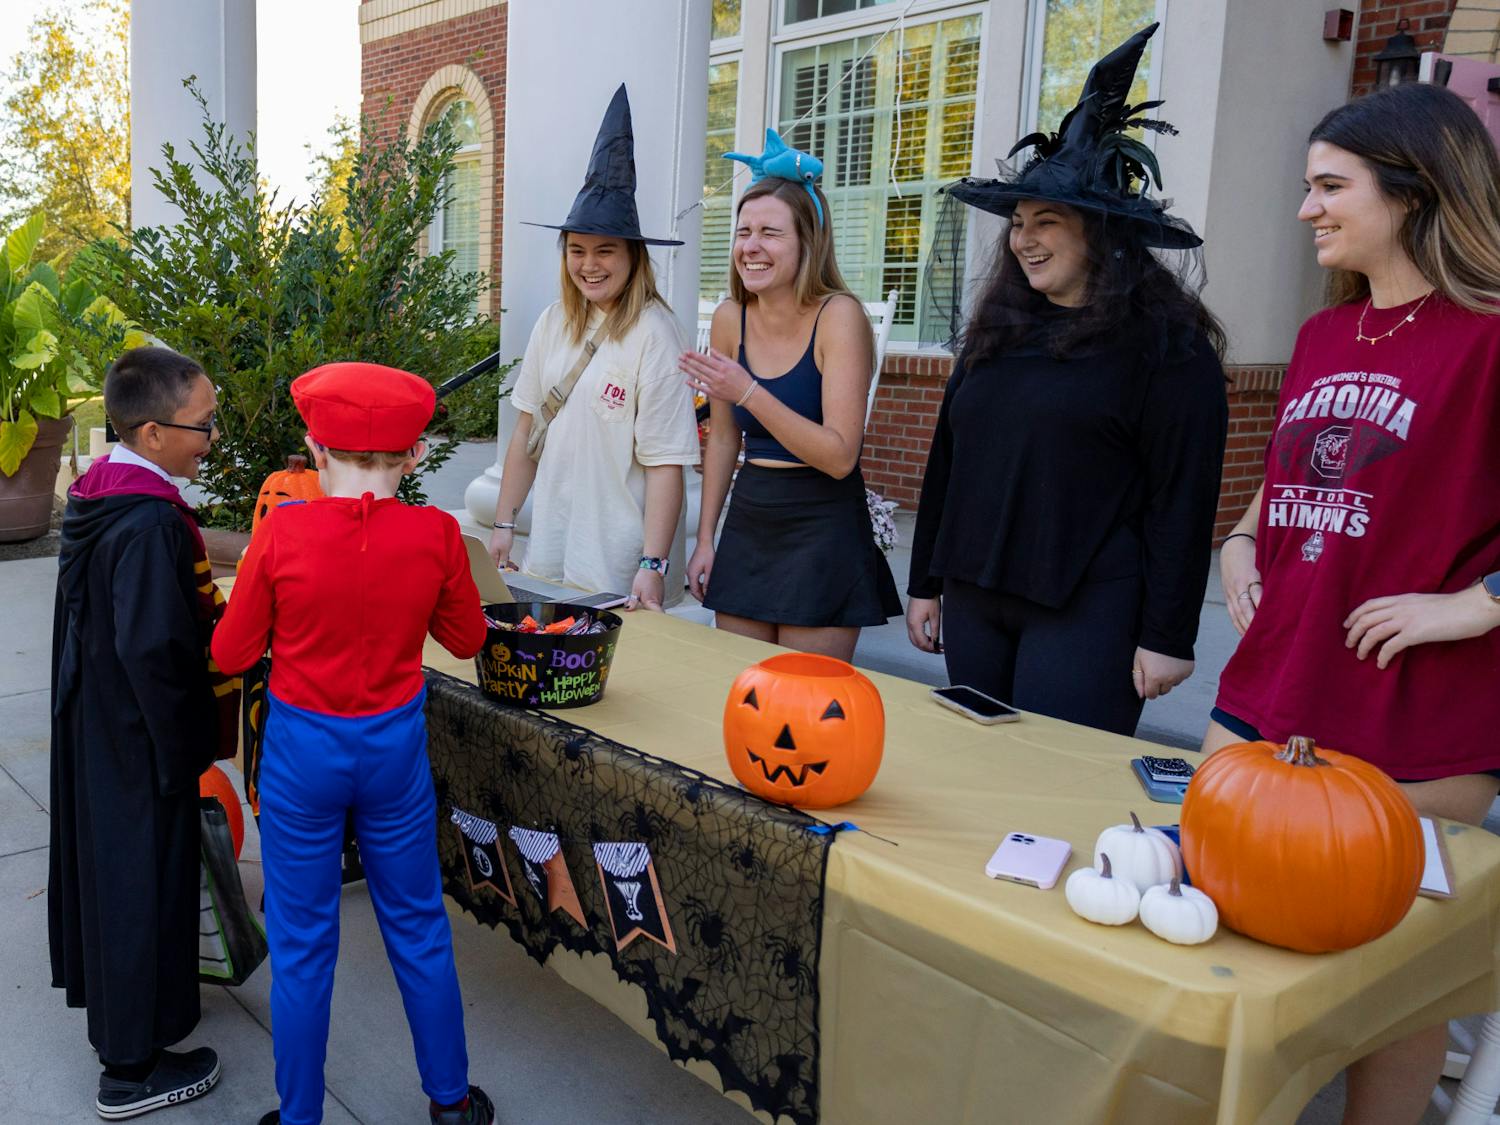 Sorority members hand out candy and compliment the costumes of two young trick or treaters during the Trick or Treat with the Greeks community event on Oct. 25, 2022. USC Greek fraternities and sororities came together to welcome community members to Greek Village for an evening of games, fun activities, unity and trick or treating.